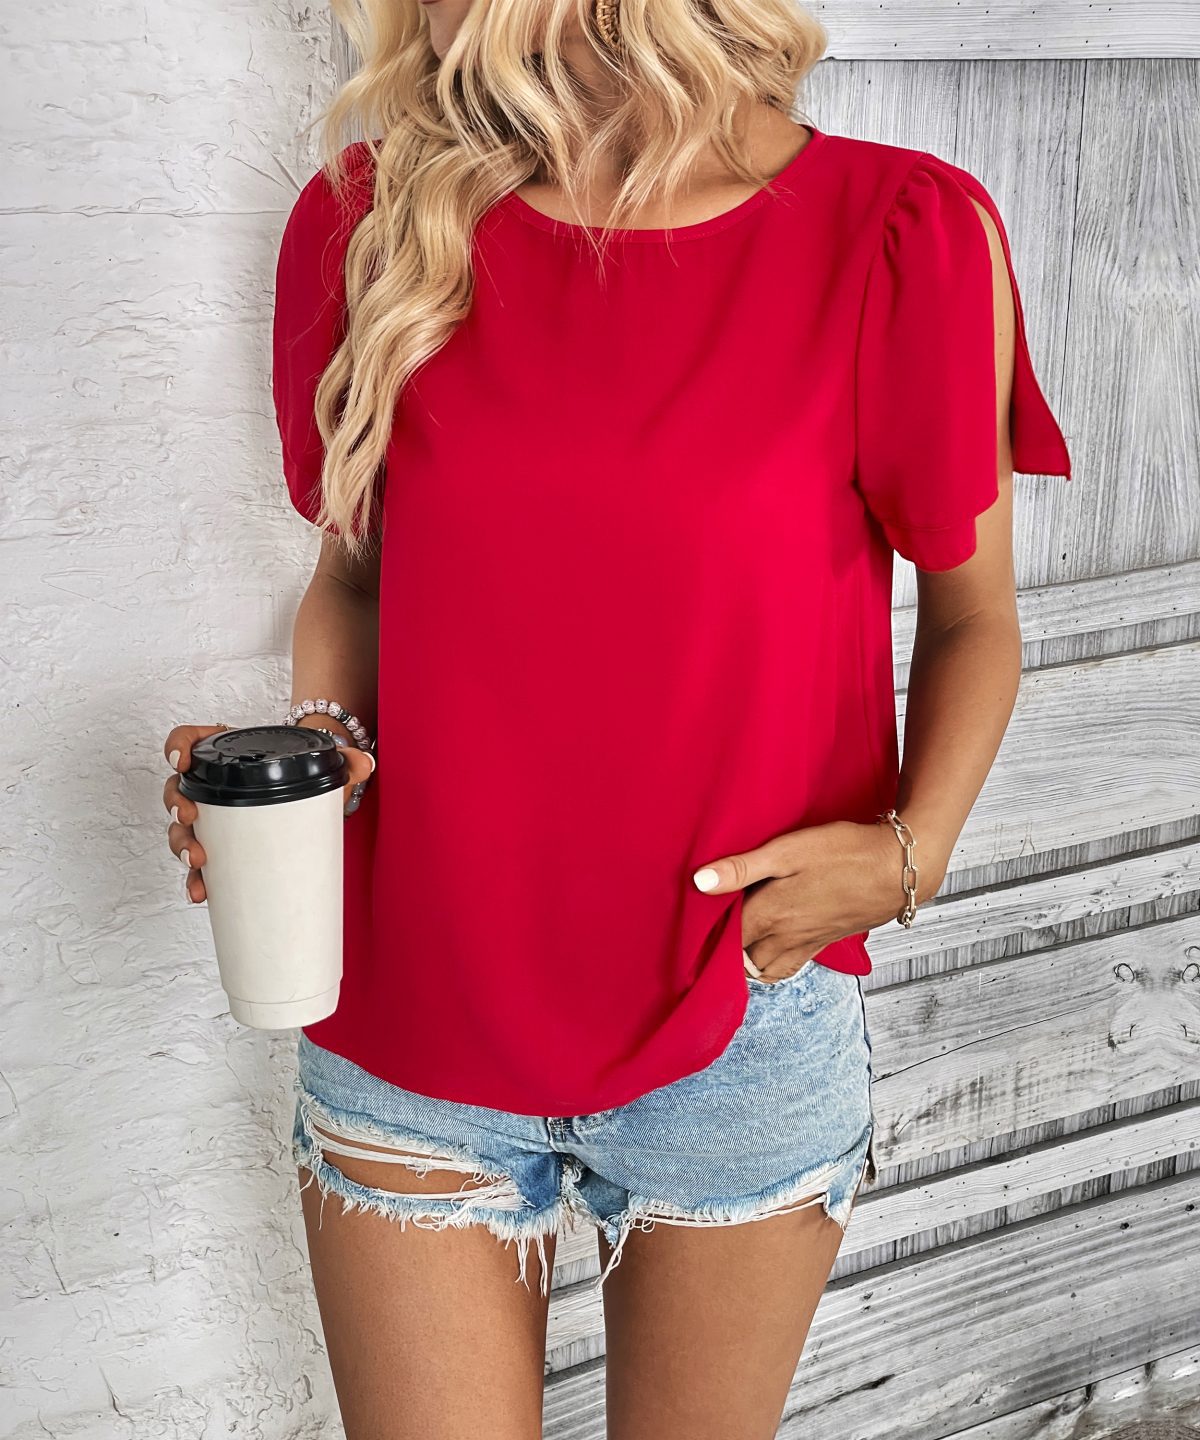 Summer Short Sleeved Red Shirt in Blouses & Shirts